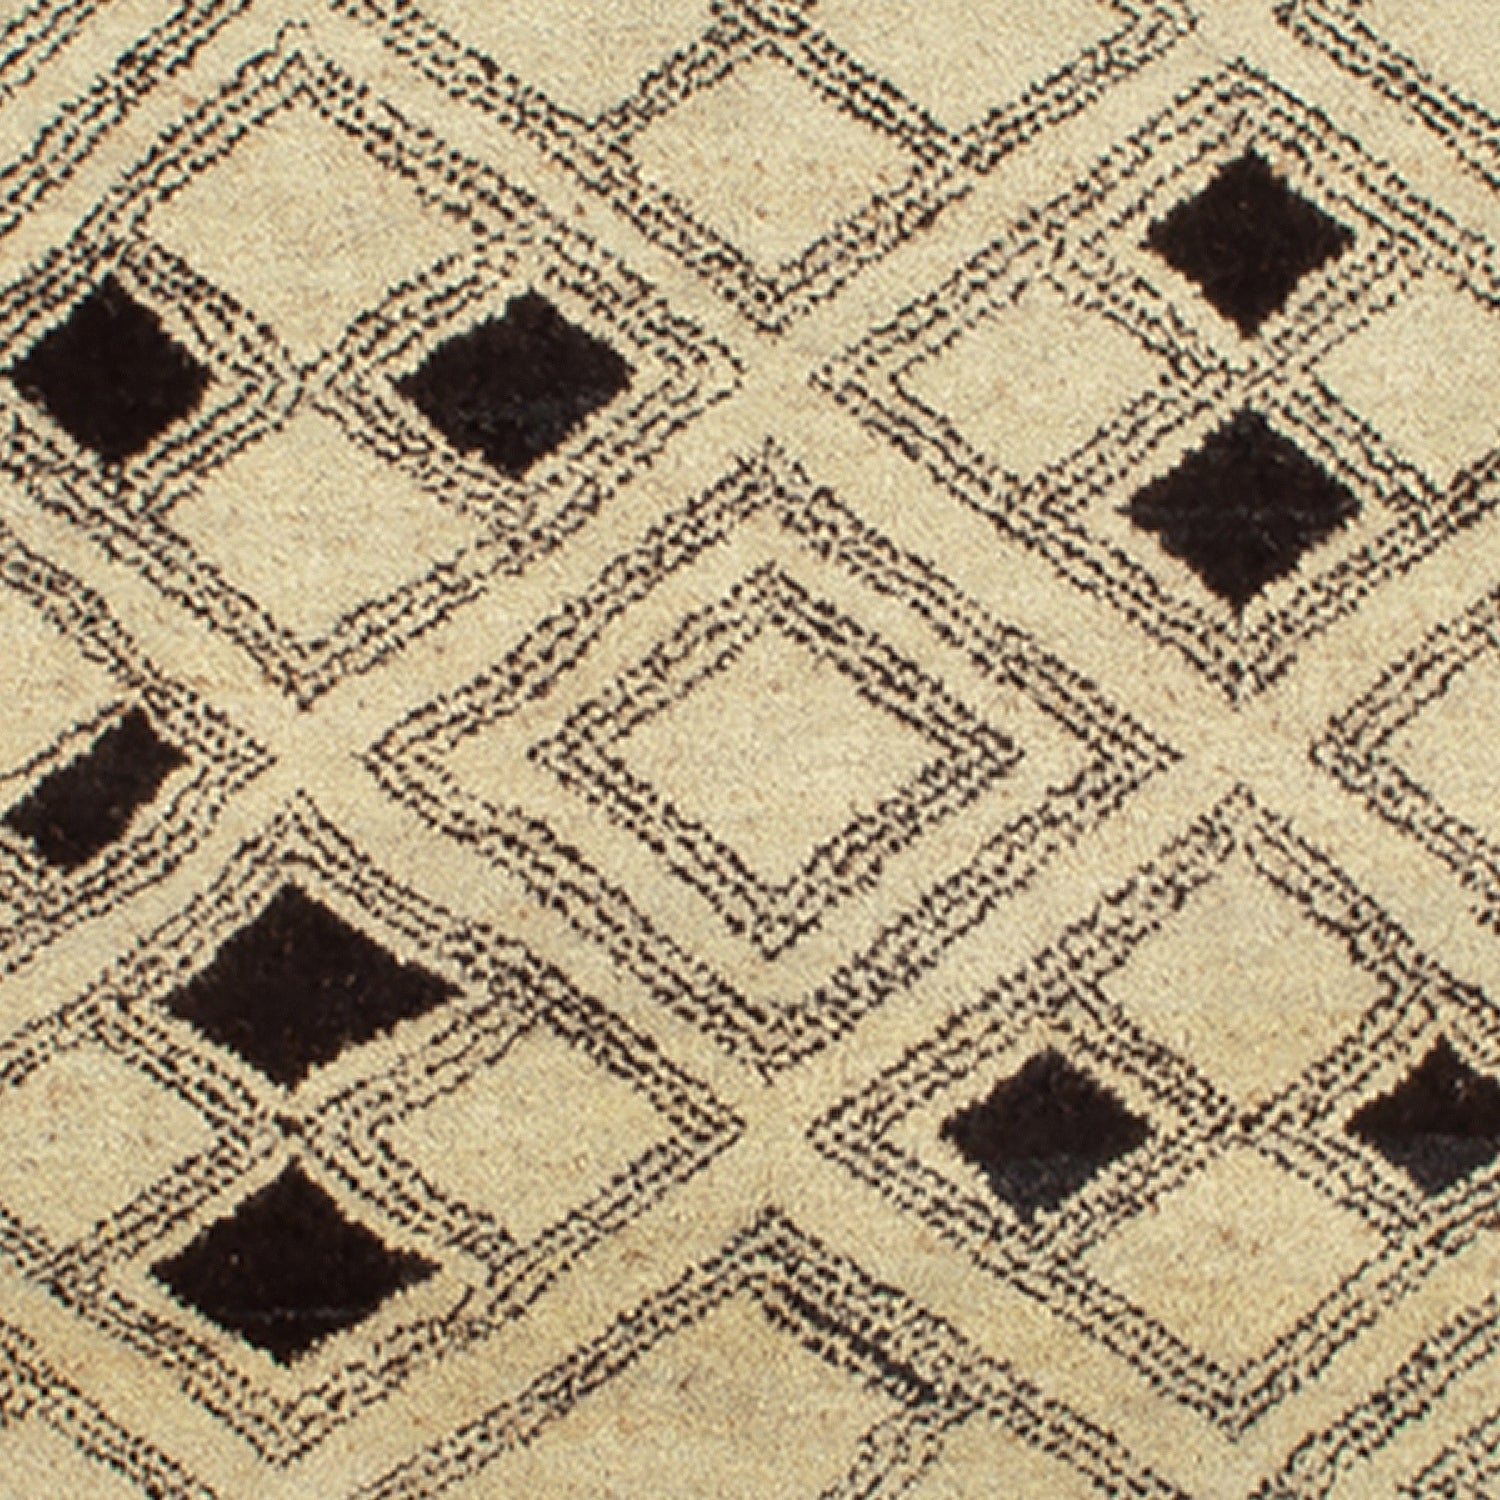 Woven high-pile rug swatch in a pattern of graduating diamond shapes in dark brown on a tan field.